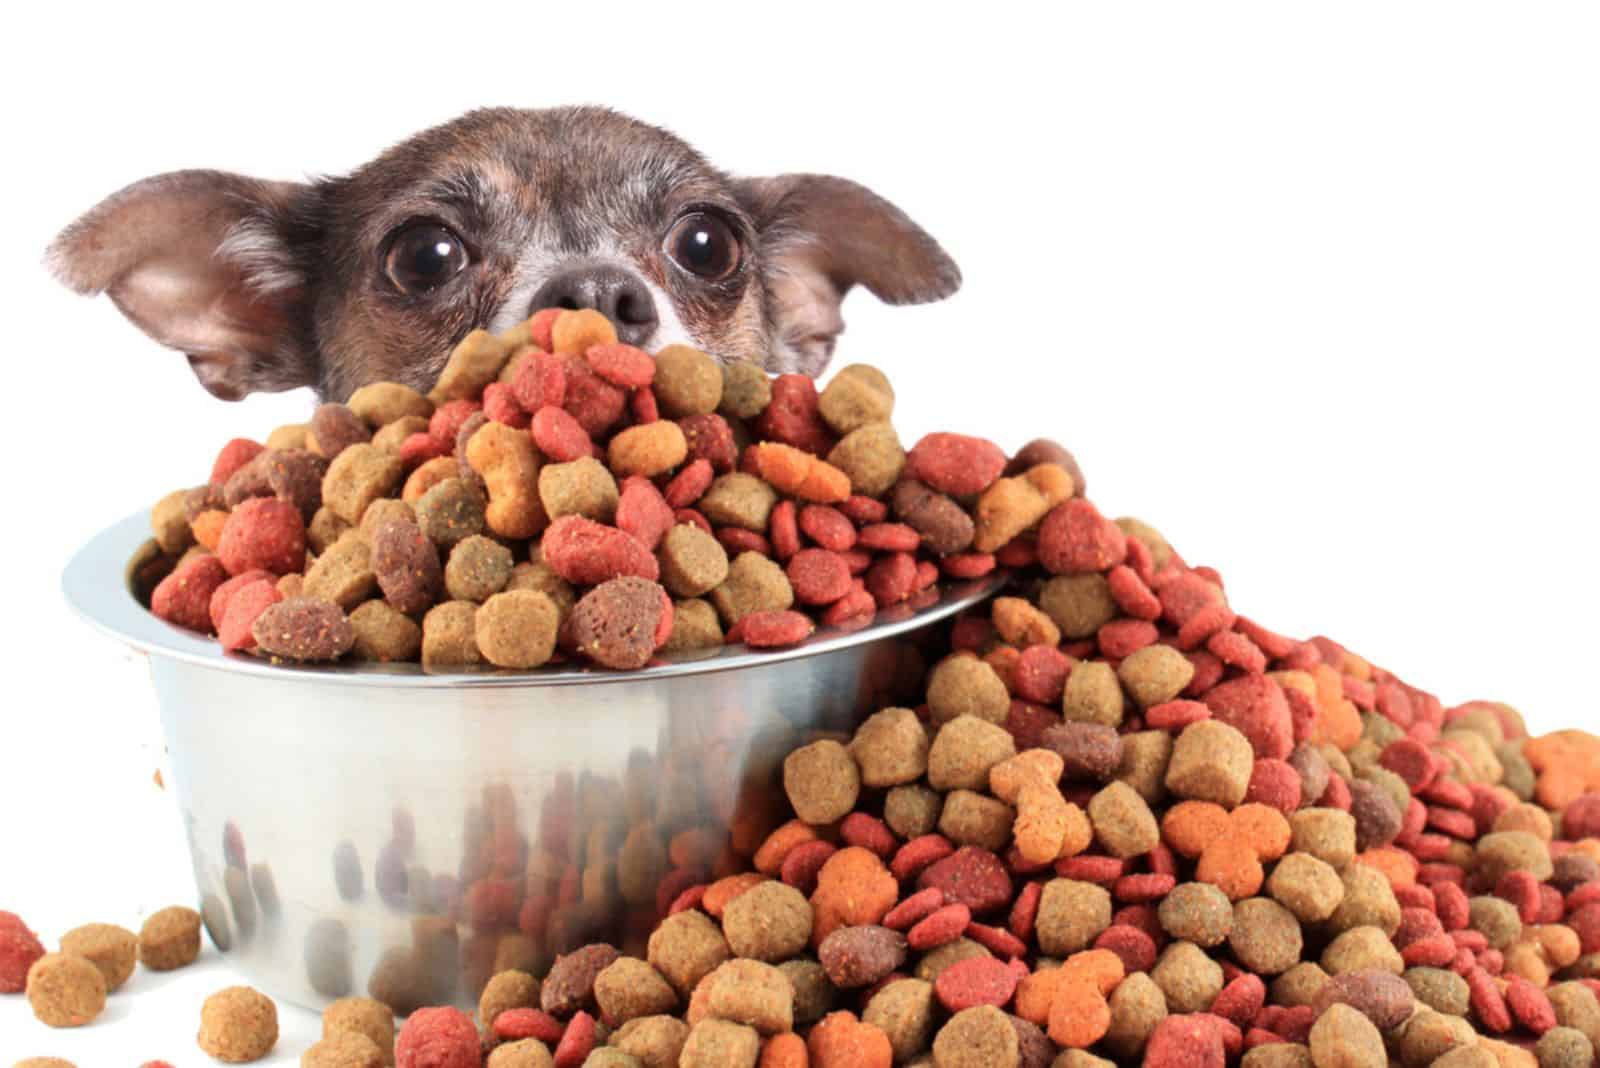 Little chihuahua peaking over large bowl of dog food too big for him